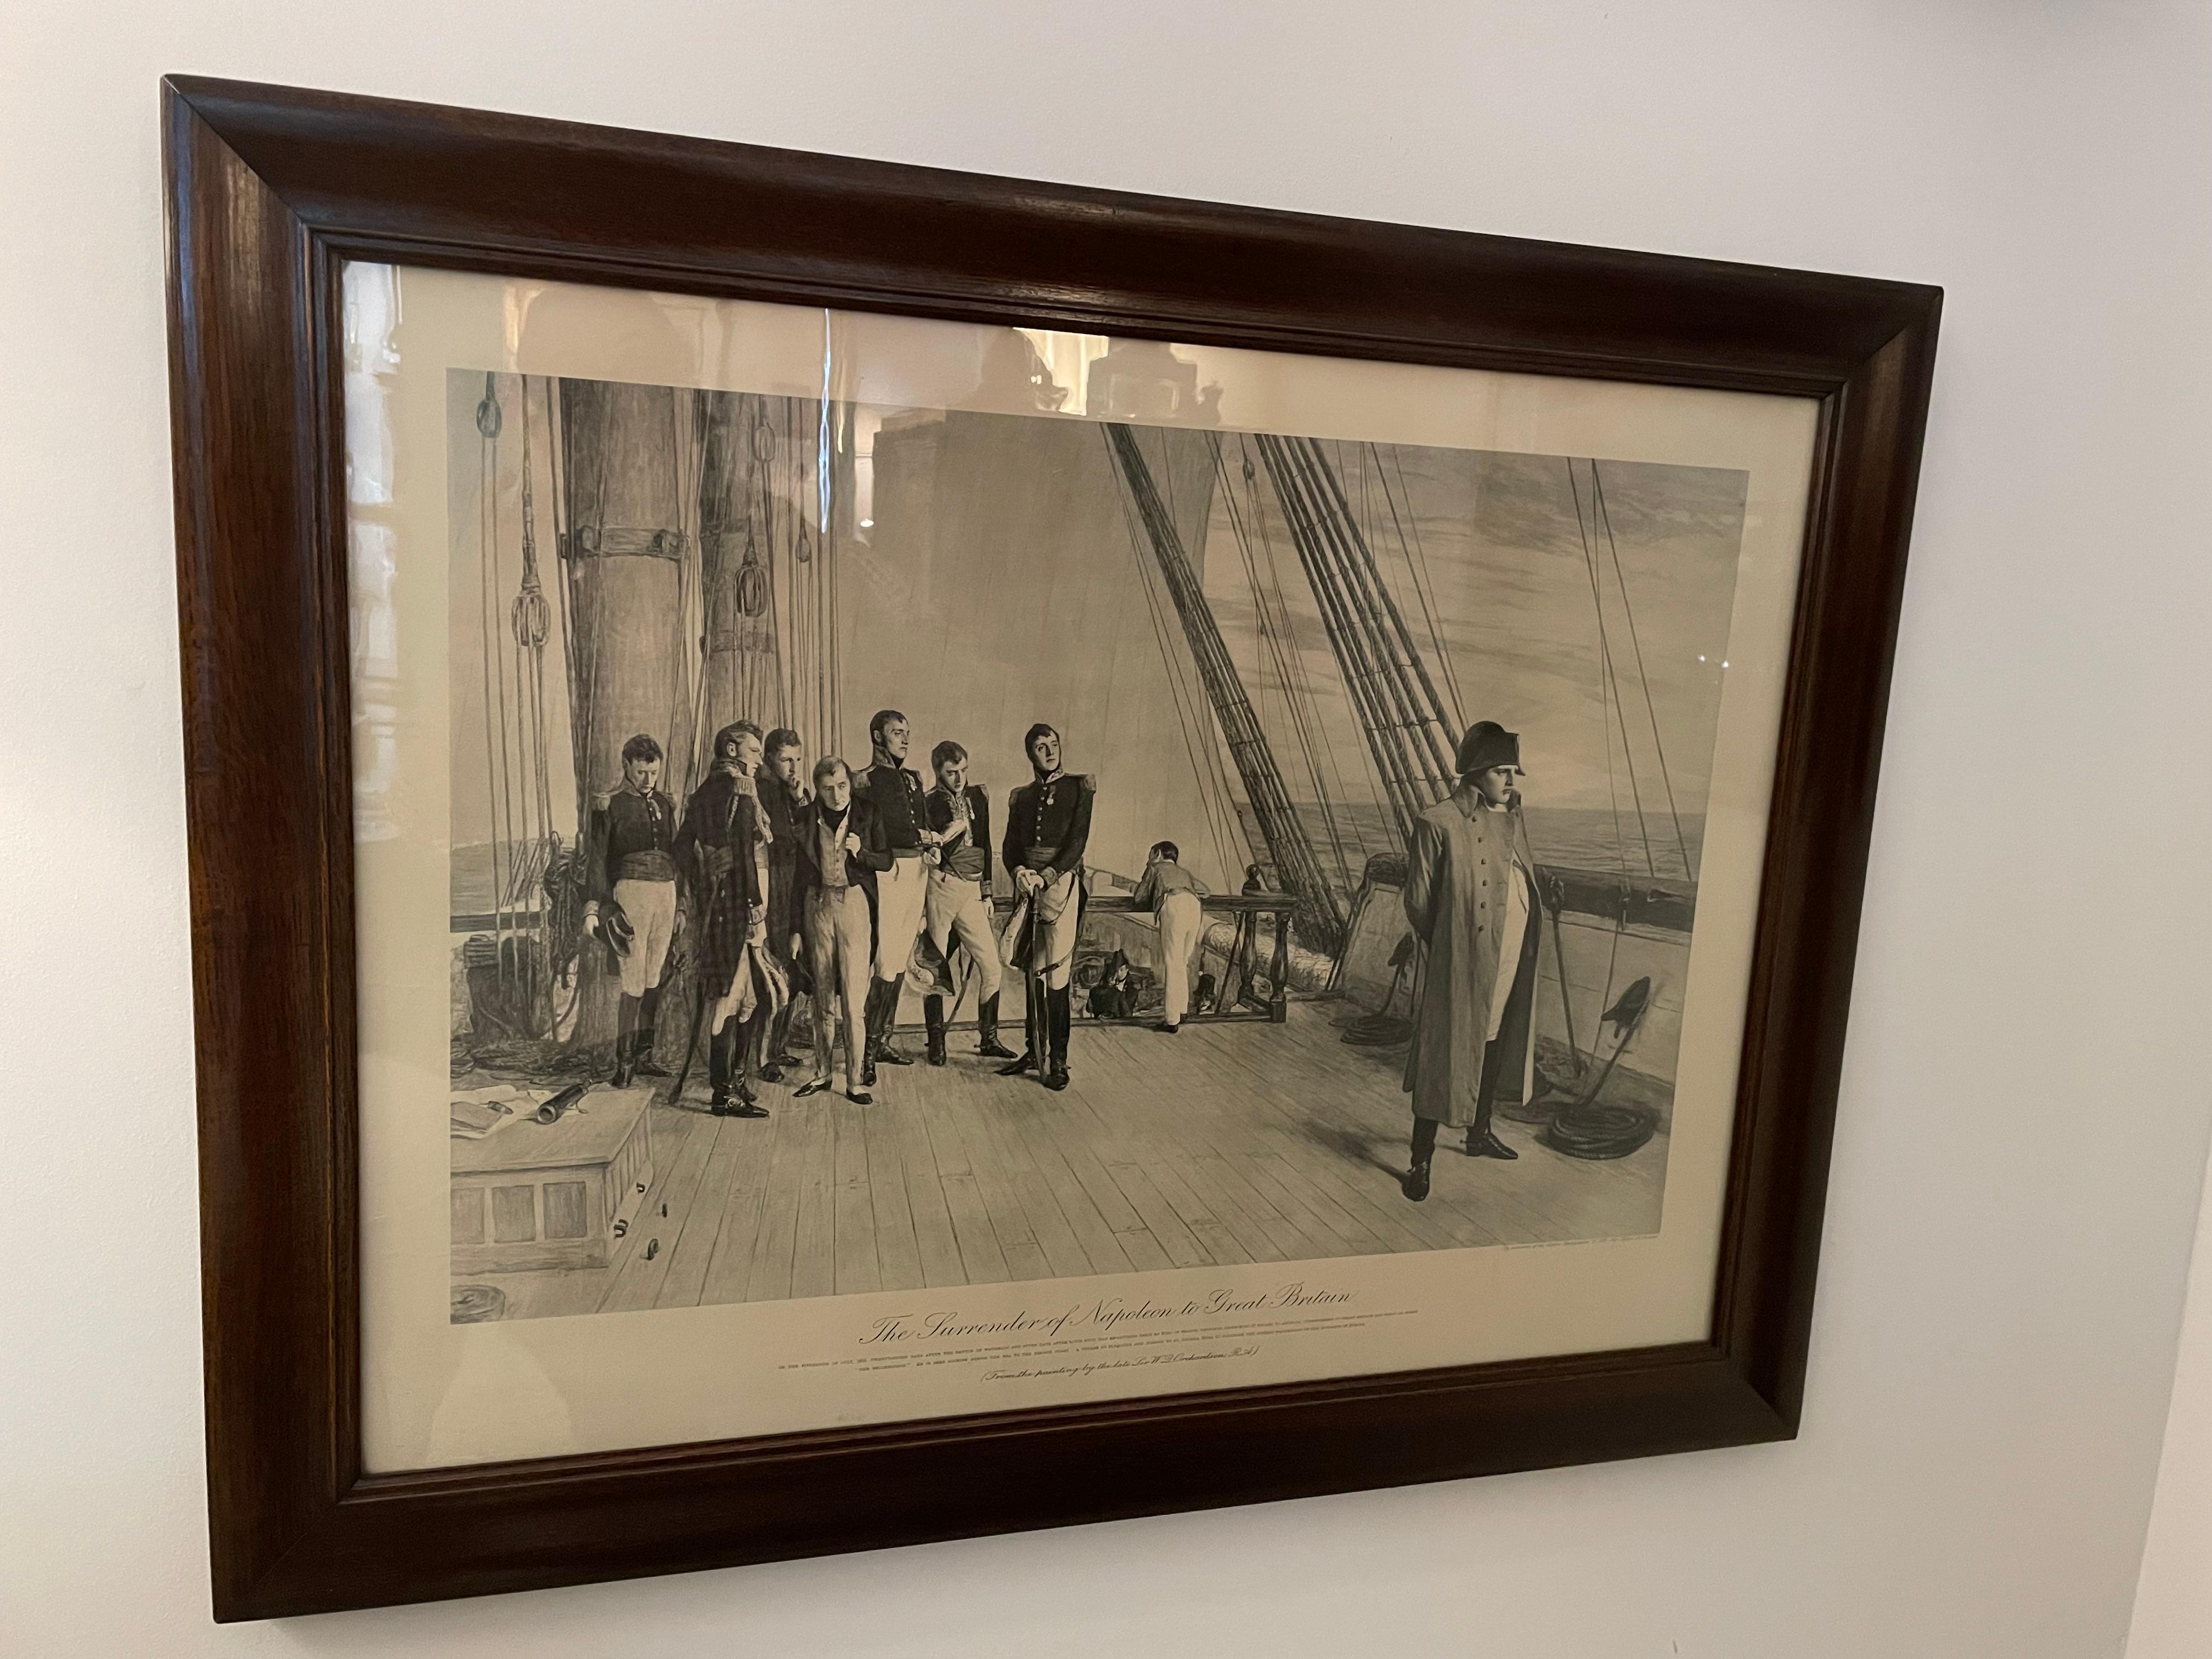 This stylish and somber photogravure dates to the late 19th century, and was created from an oil painting by Sir William Q. Orchardson. The photogravure depicts Napoleon Bonaparte aboard the Bellerophan on his way to the island of Elba, after his